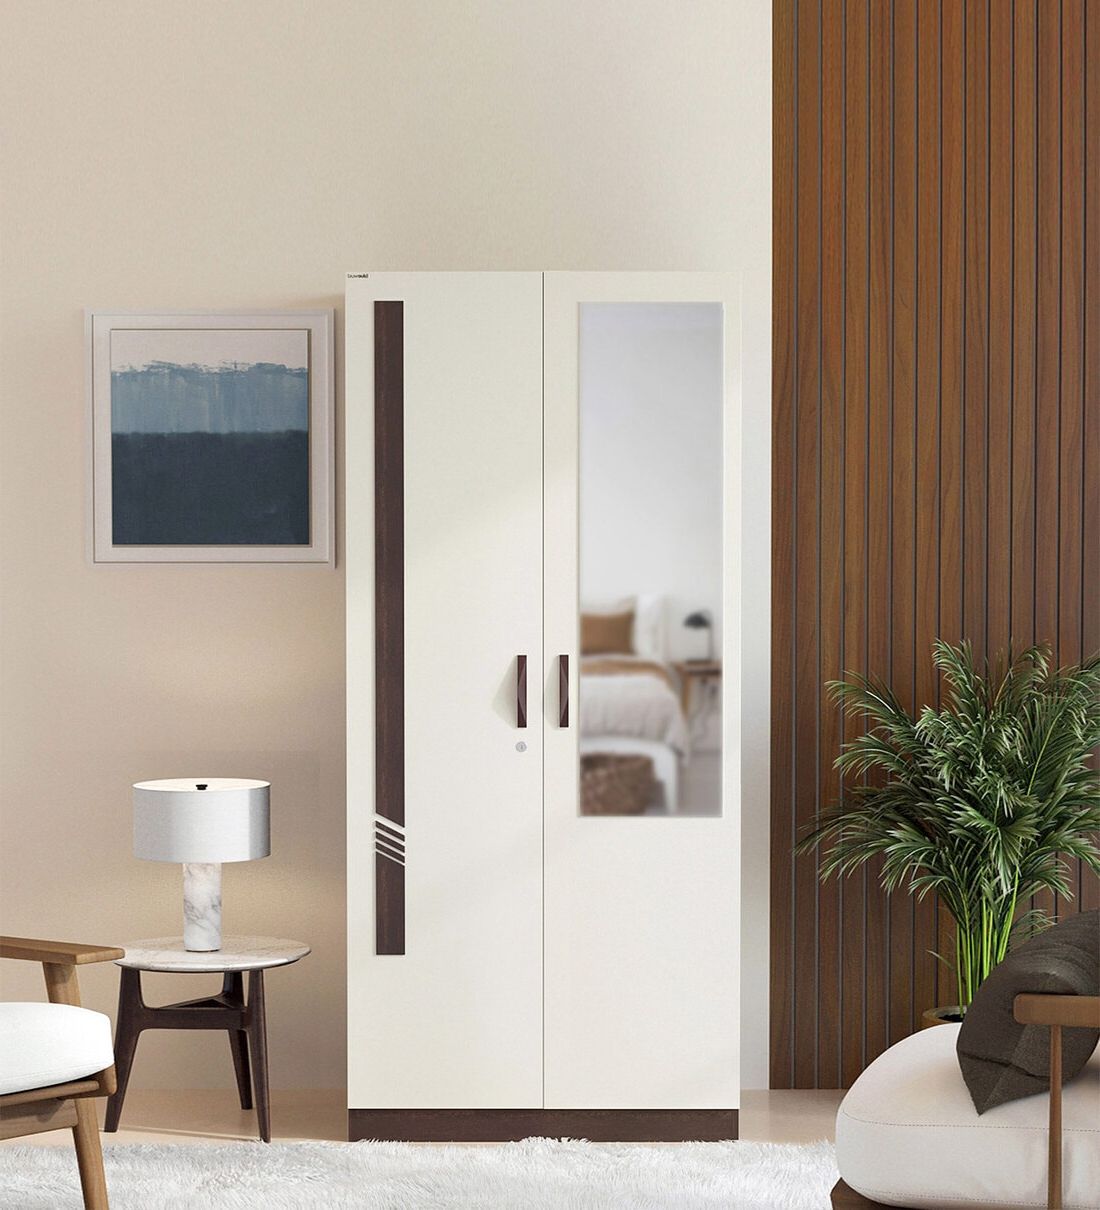 [%buy Andrie 2 Door Wardrobe In Wenge & White Finish With Mirror At 26% Off Bluewud | Pepperfry With Trendy 2 Door Wardrobes|2 Door Wardrobes For Newest Buy Andrie 2 Door Wardrobe In Wenge & White Finish With Mirror At 26% Off Bluewud | Pepperfry|popular 2 Door Wardrobes Intended For Buy Andrie 2 Door Wardrobe In Wenge & White Finish With Mirror At 26% Off Bluewud | Pepperfry|trendy Buy Andrie 2 Door Wardrobe In Wenge & White Finish With Mirror At 26% Off Bluewud | Pepperfry Regarding 2 Door Wardrobes%] (Photo 1 of 10)